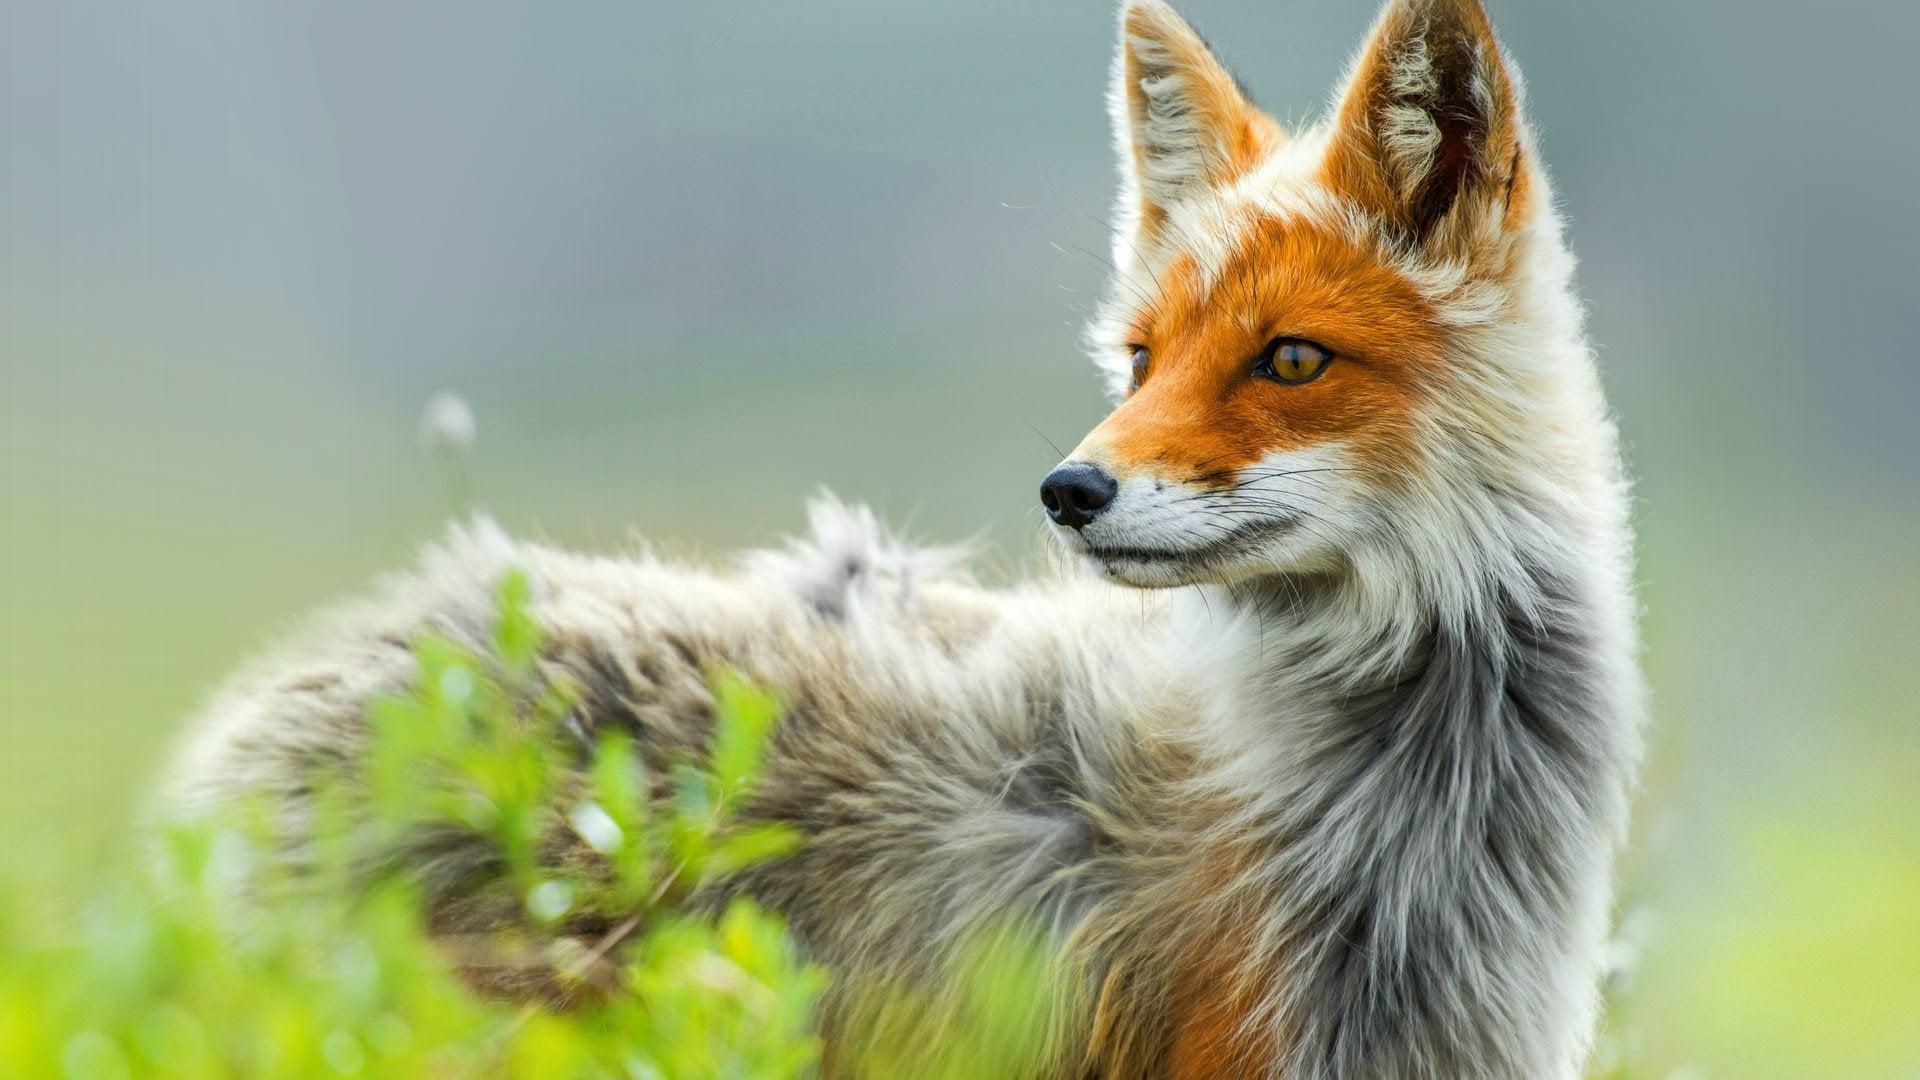 A fox's eyes are adapted for seeing in the dark. Its pupils